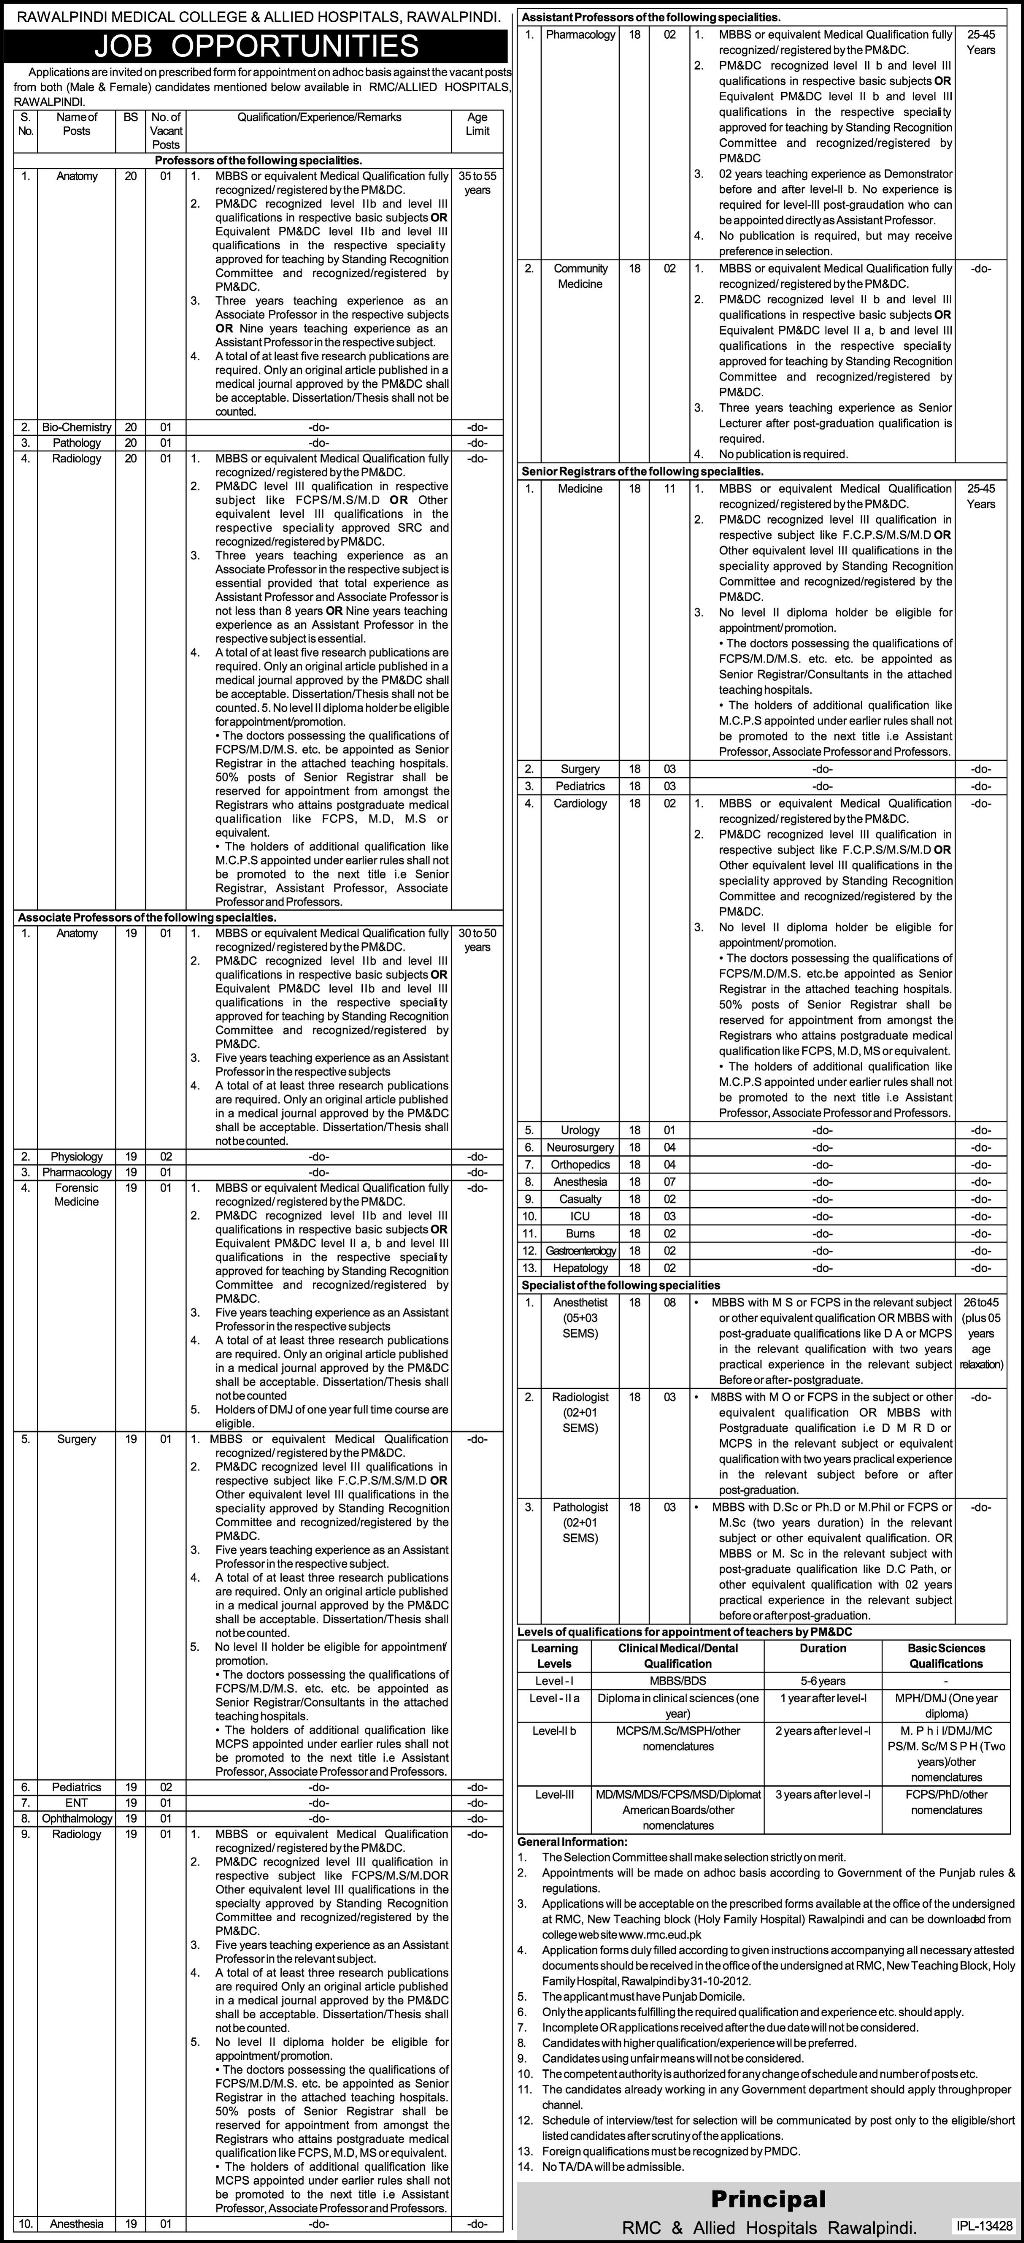 RMC Rawalpindi Medical College & Allied Hospitals Requires Teaching Faculty (Government Job)